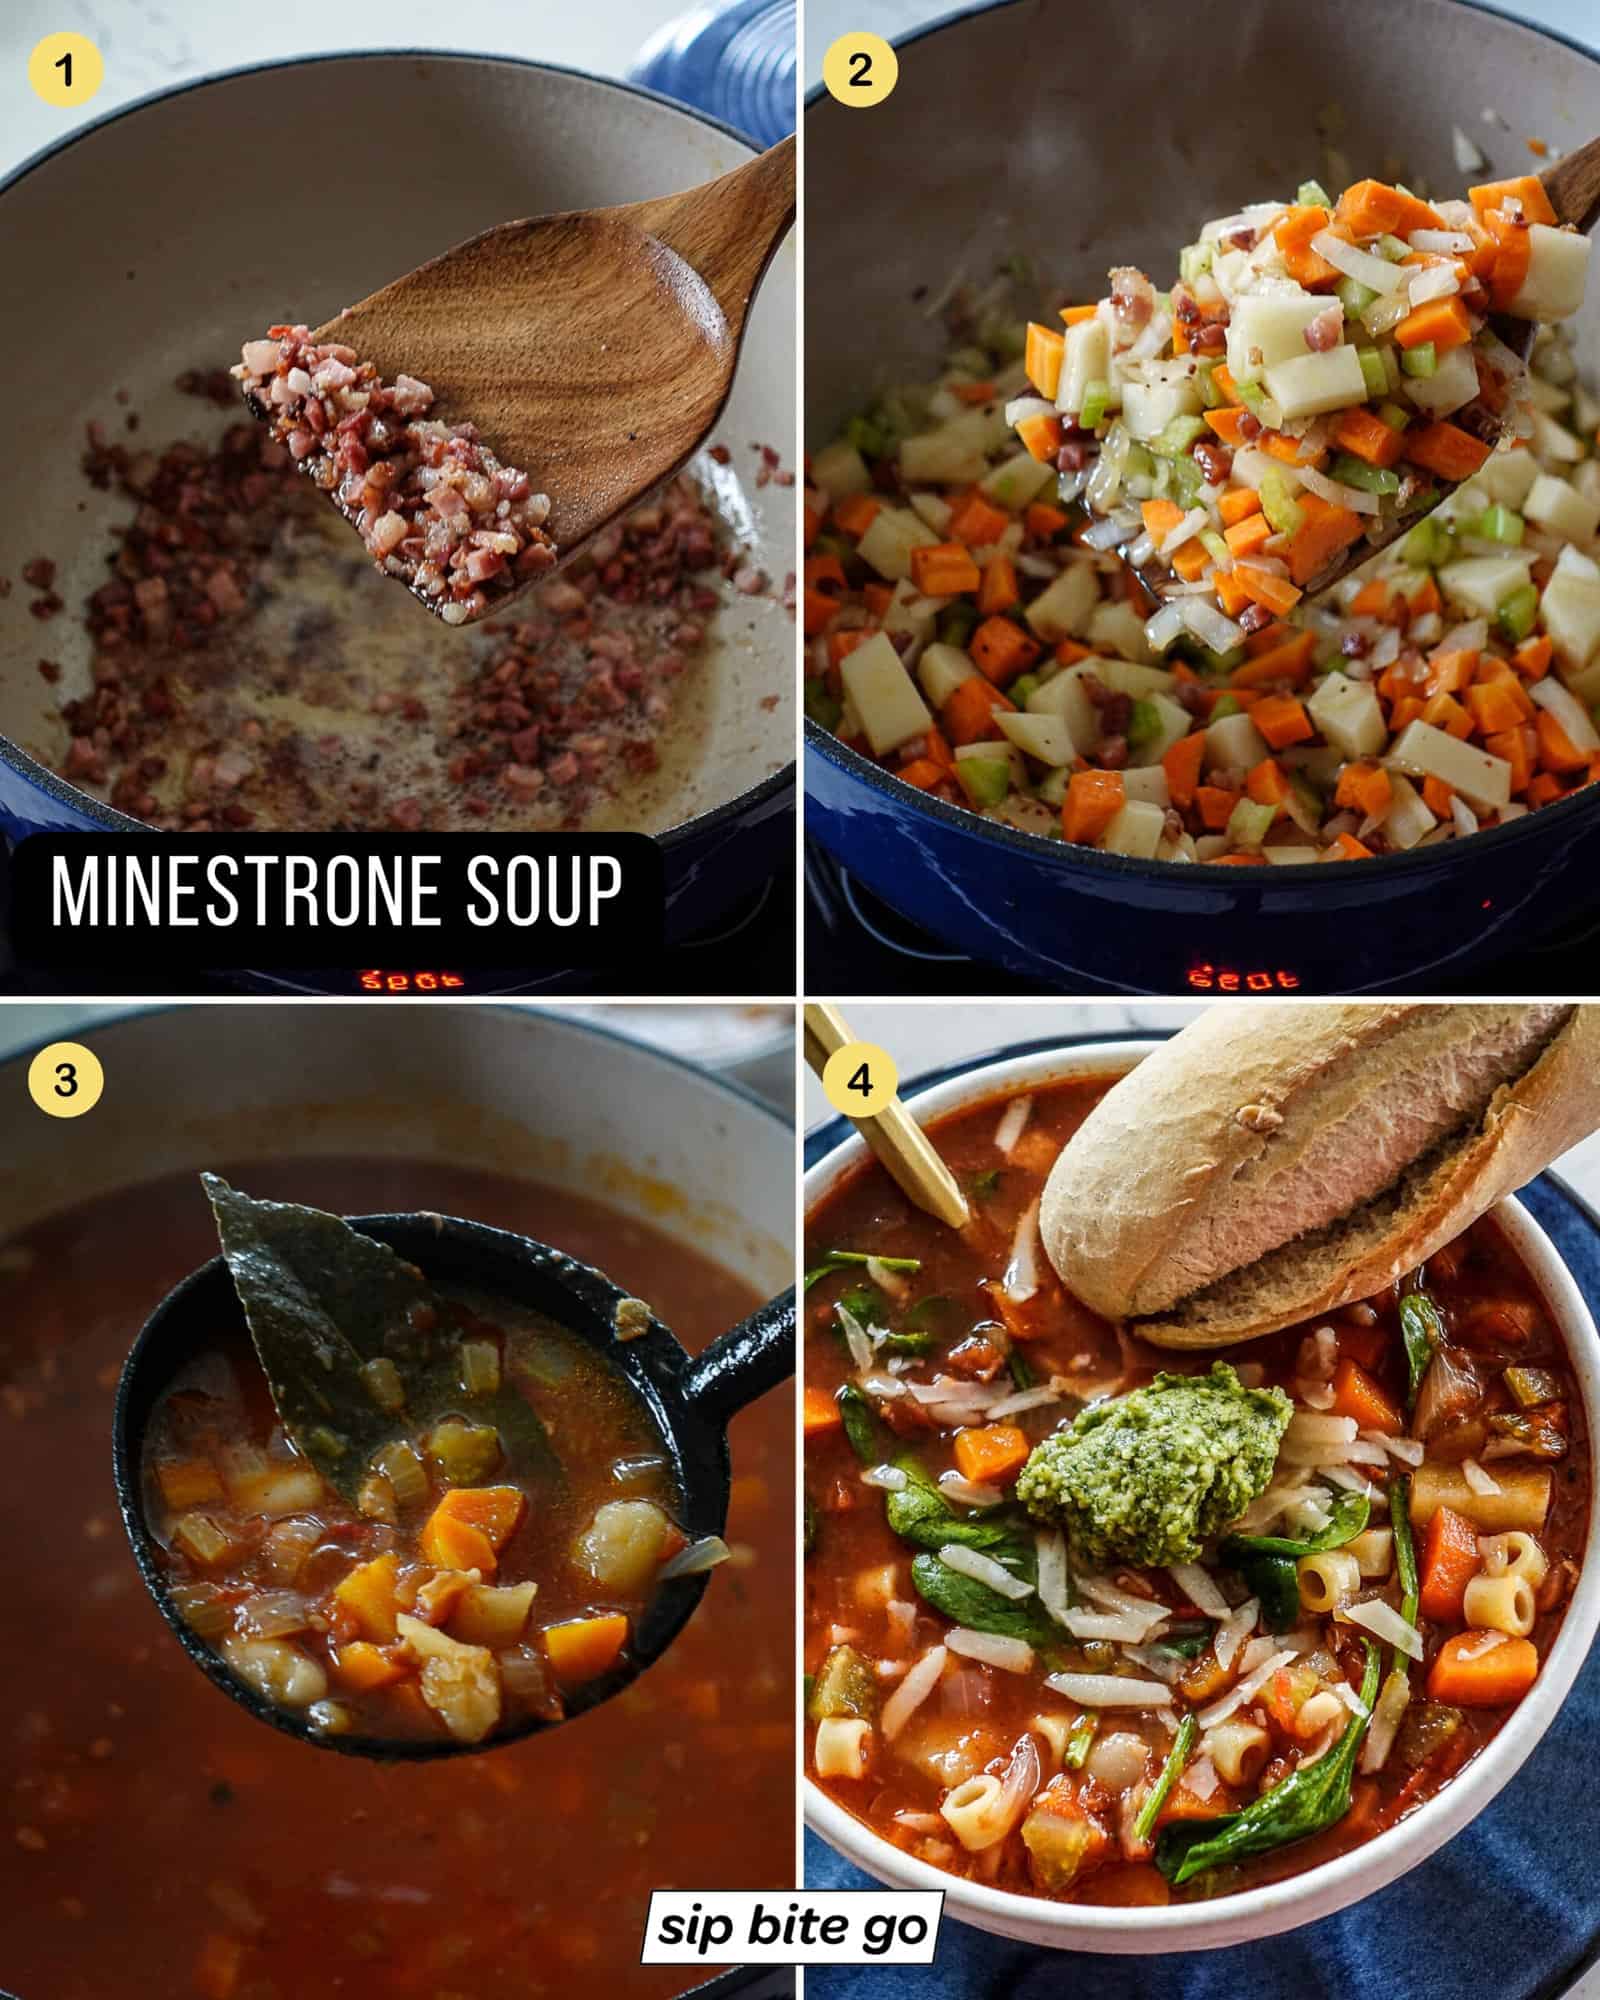 Recipe steps to make minestrone soup from scratch